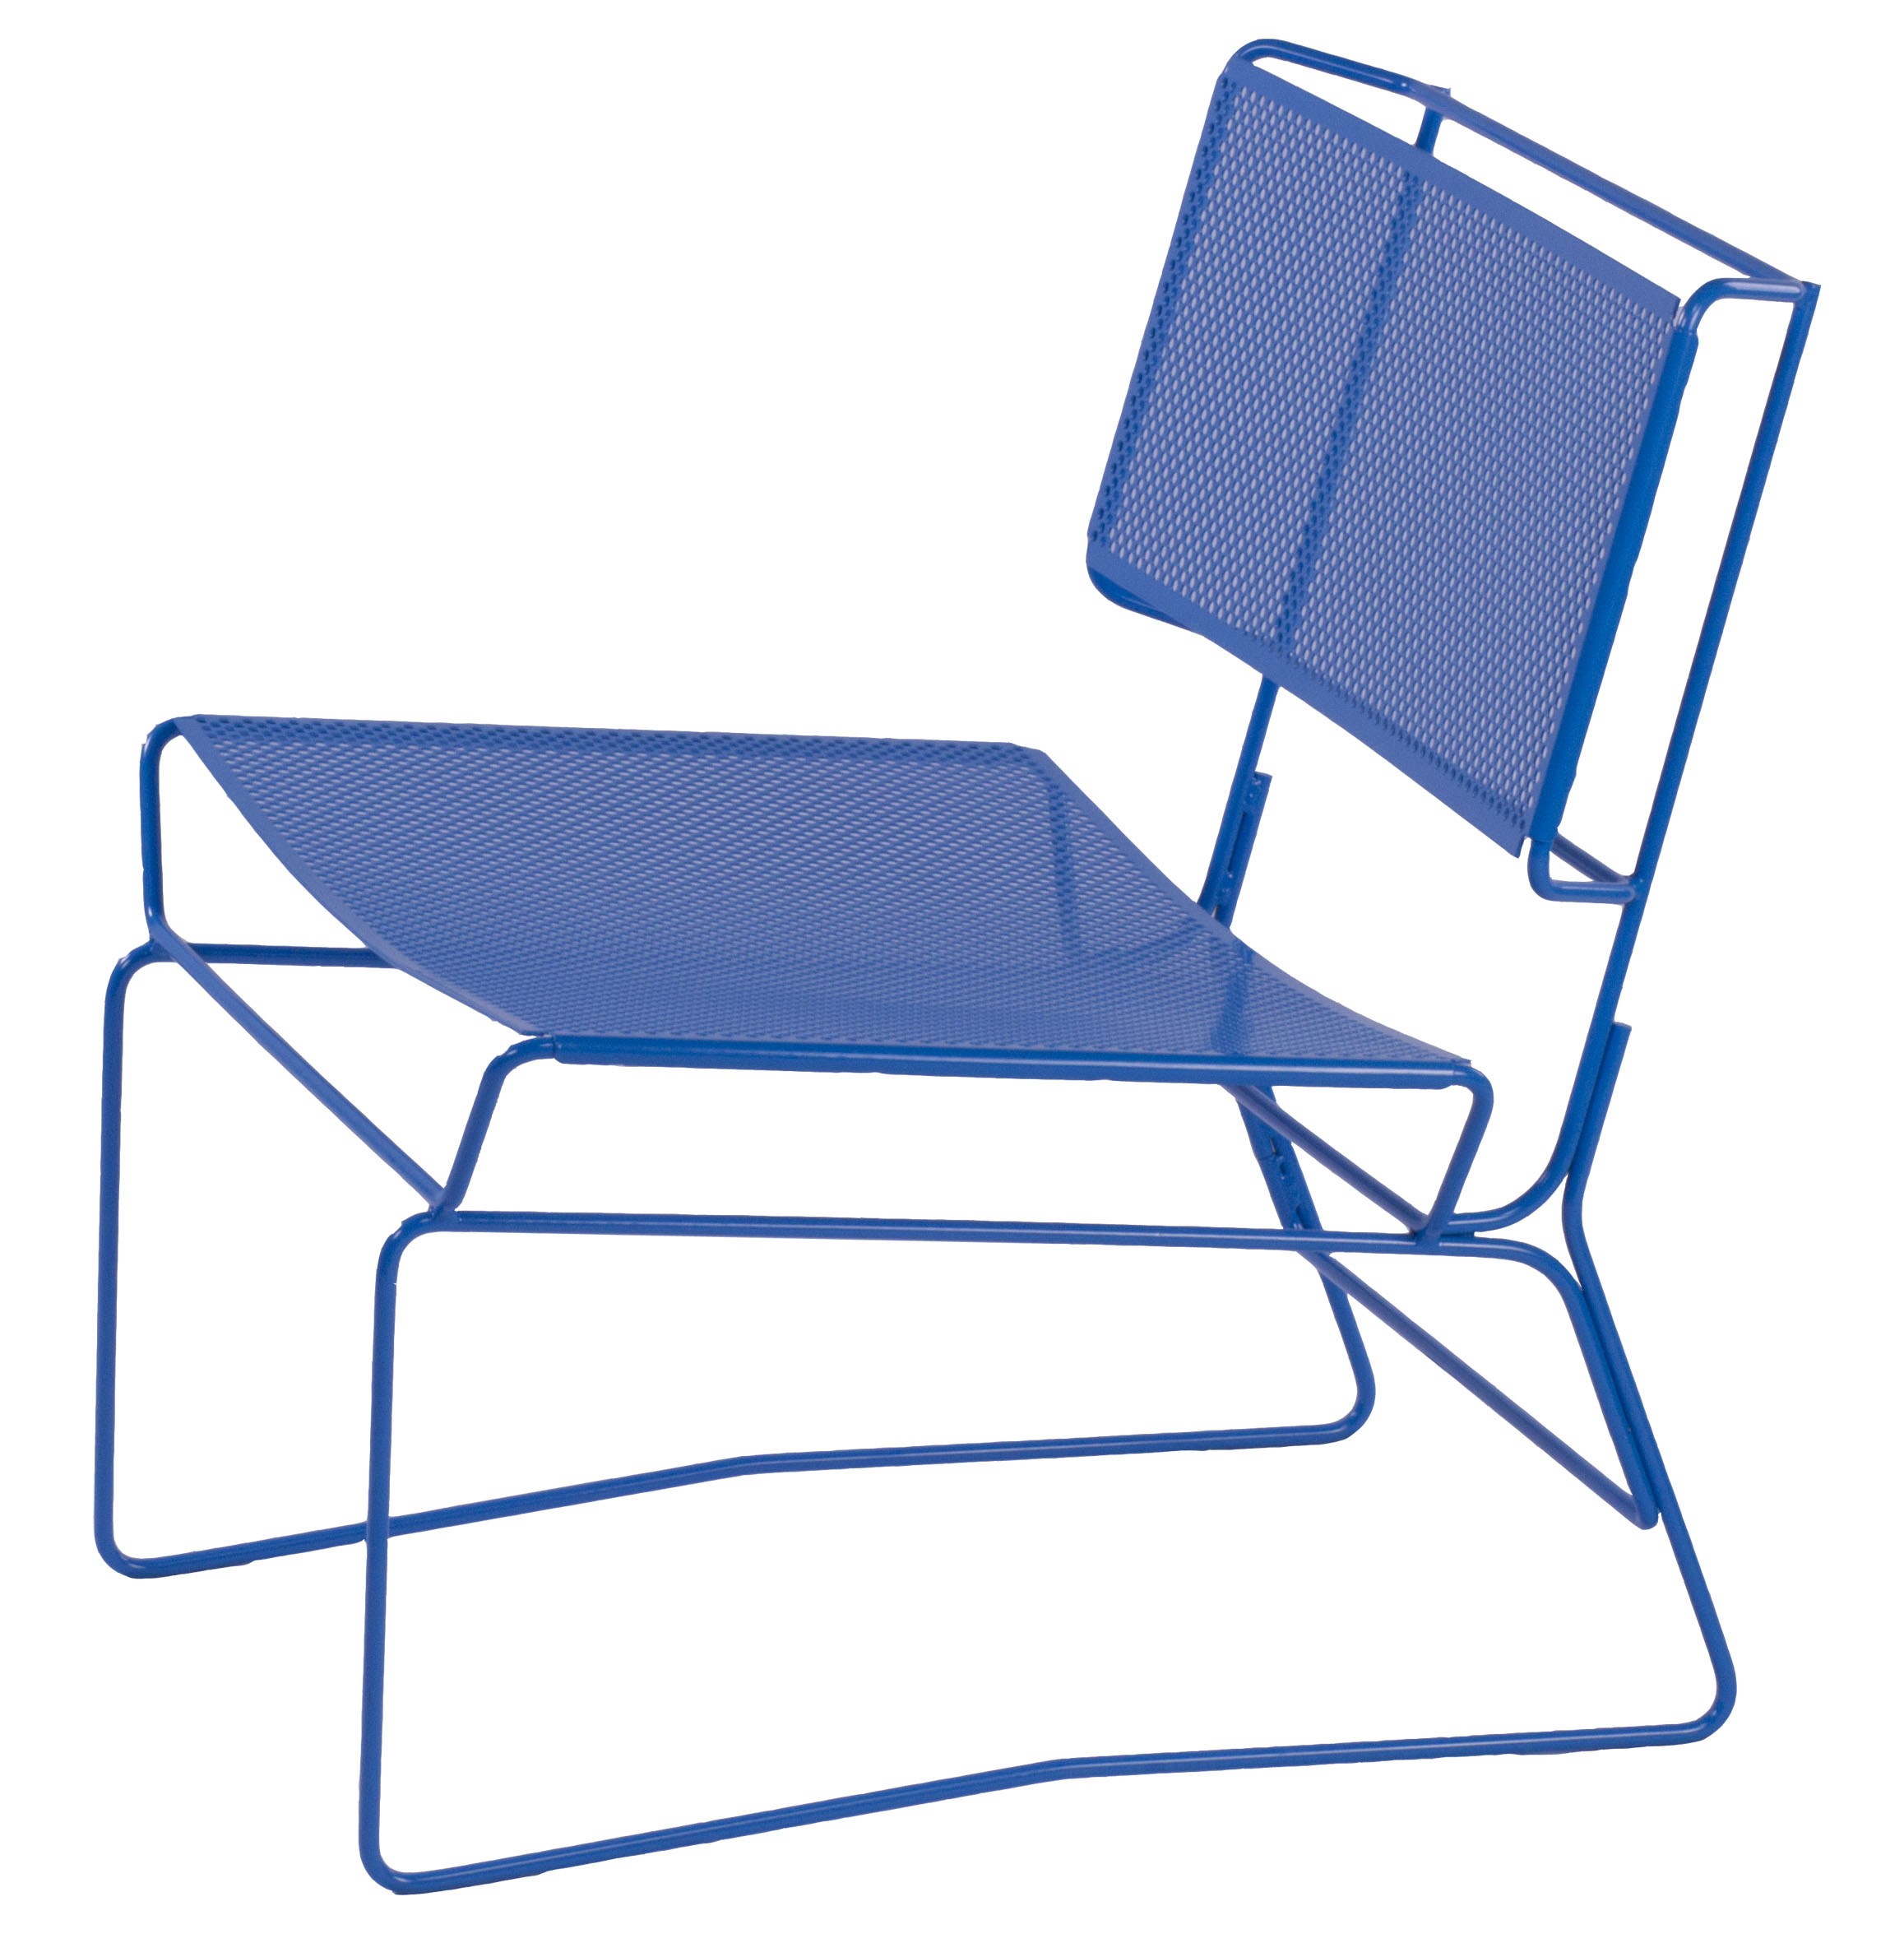 FIL Chair by François Azambourg for AA New Design